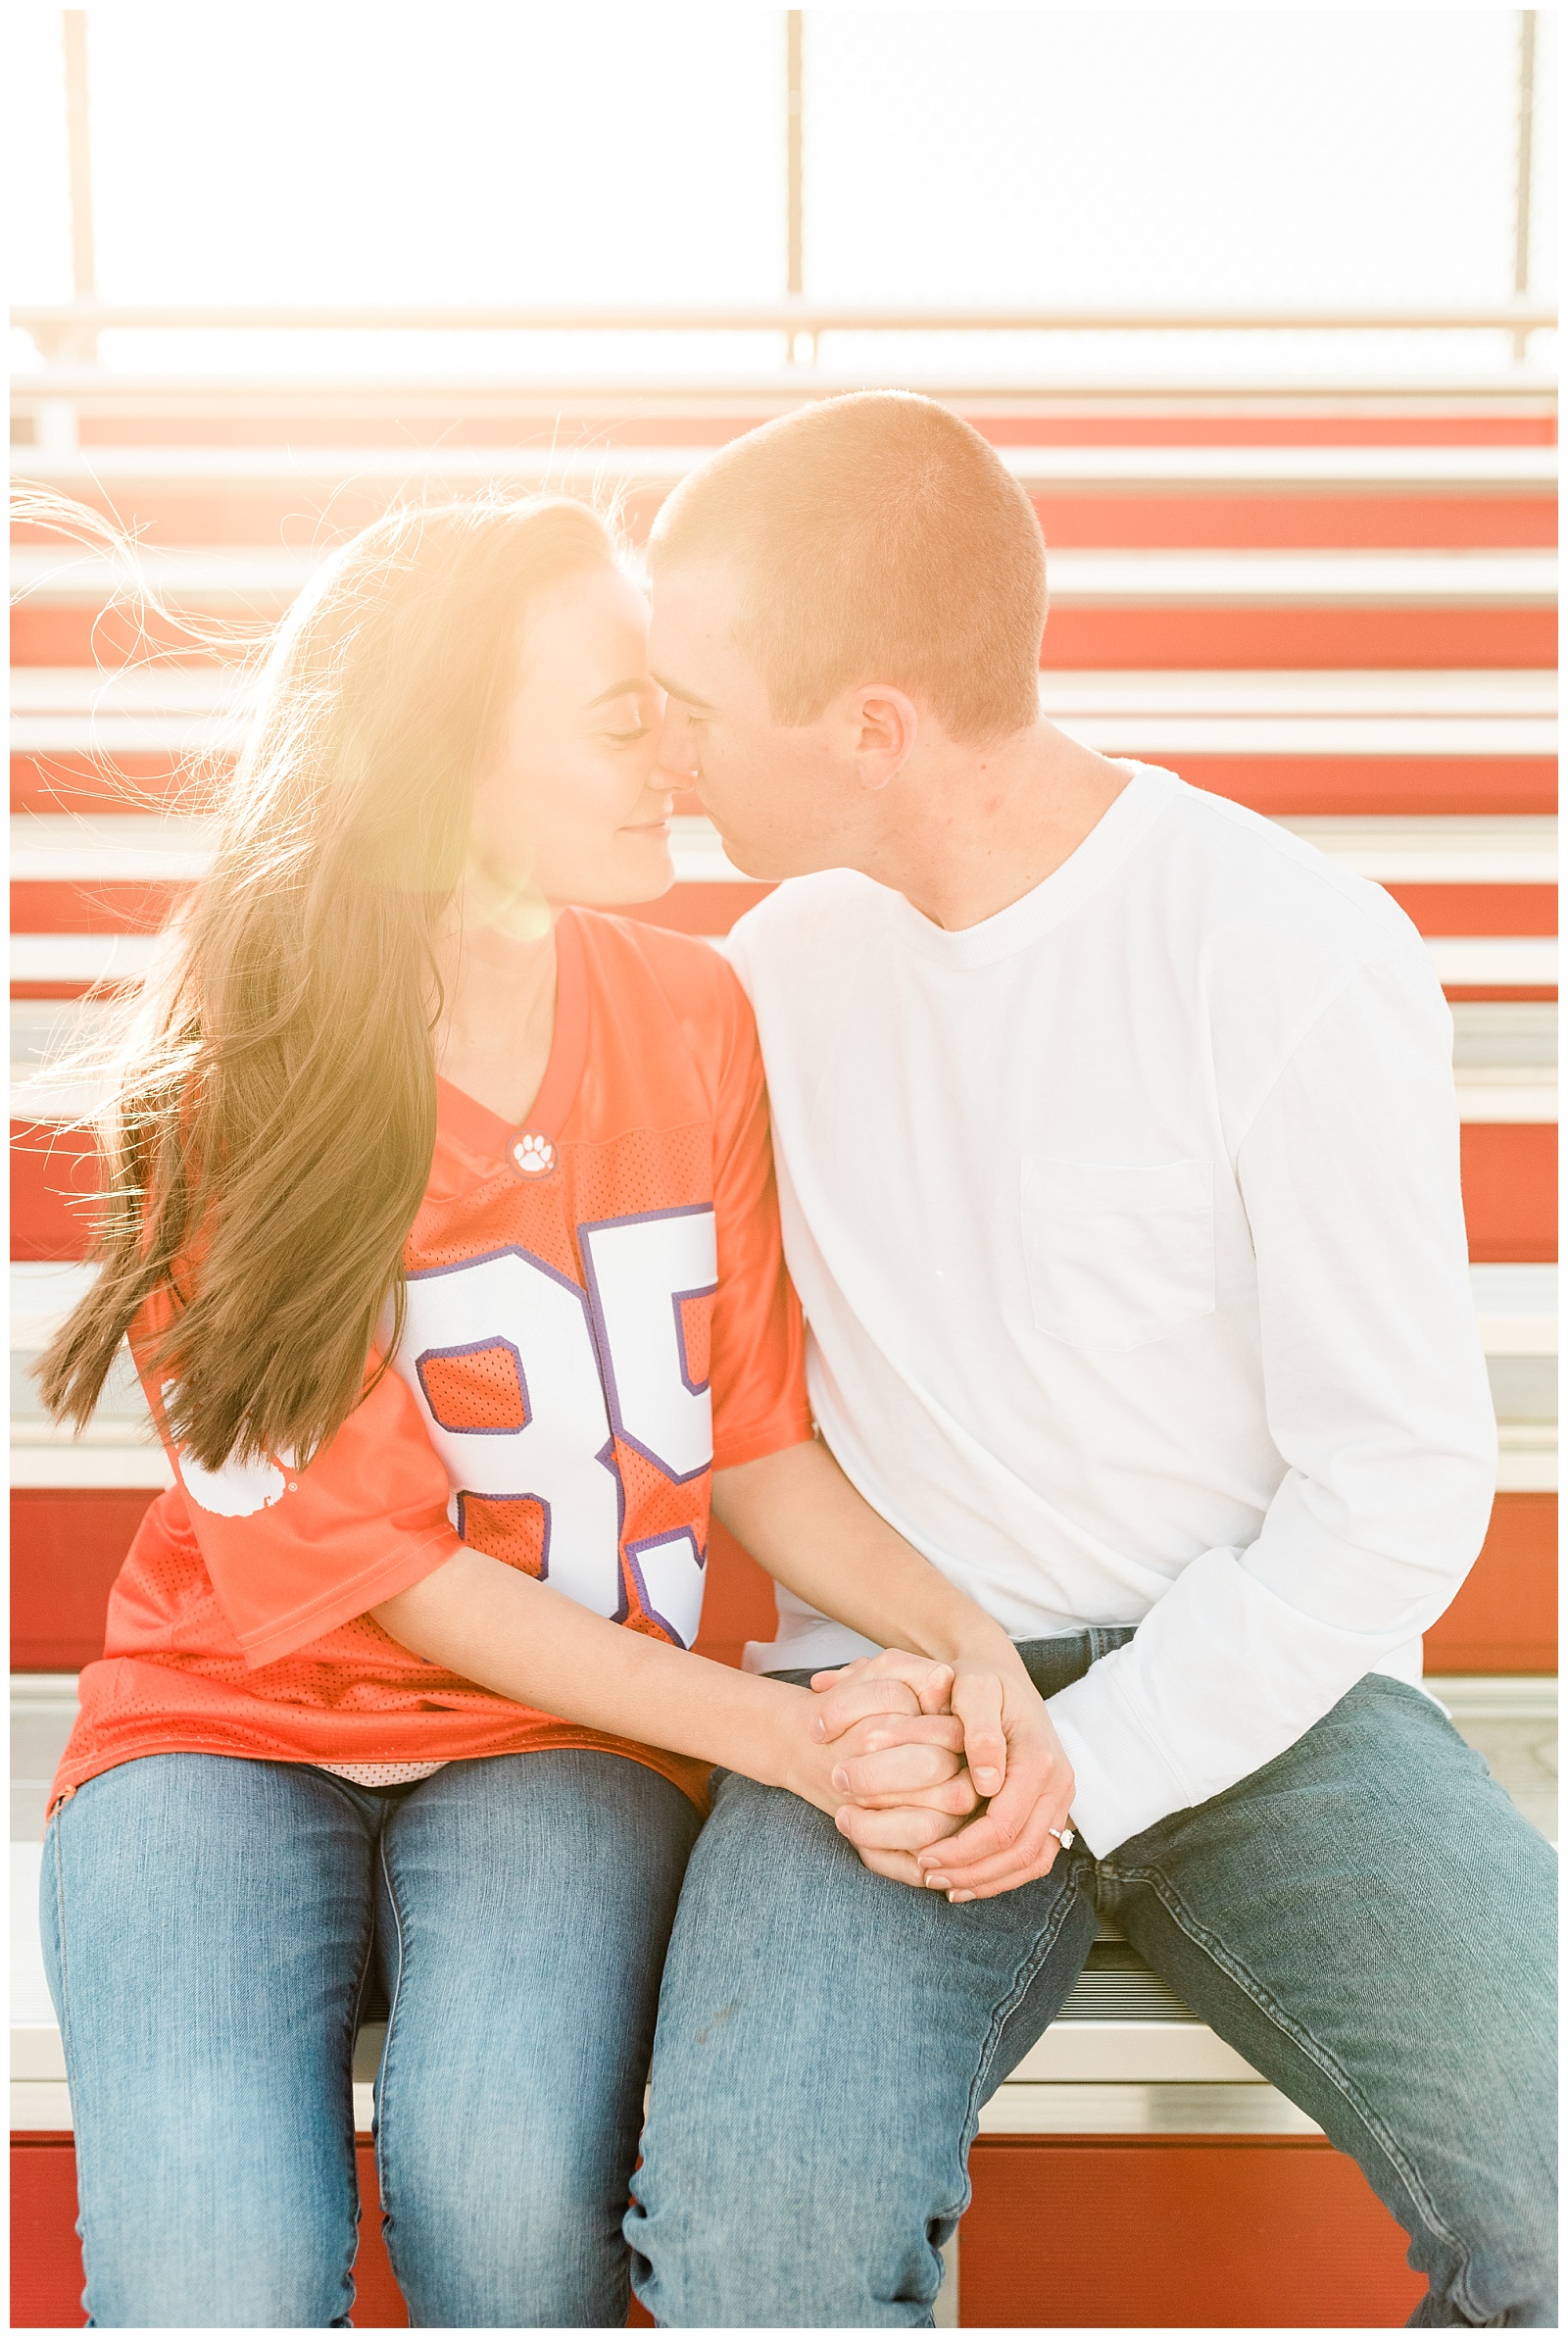 New Jersey, Engagement Session, Wedding Photographer, NFL, Coach, LA Chargers, Football, Athletic, Sporty, Jersey, Golden Hour, Bleachers